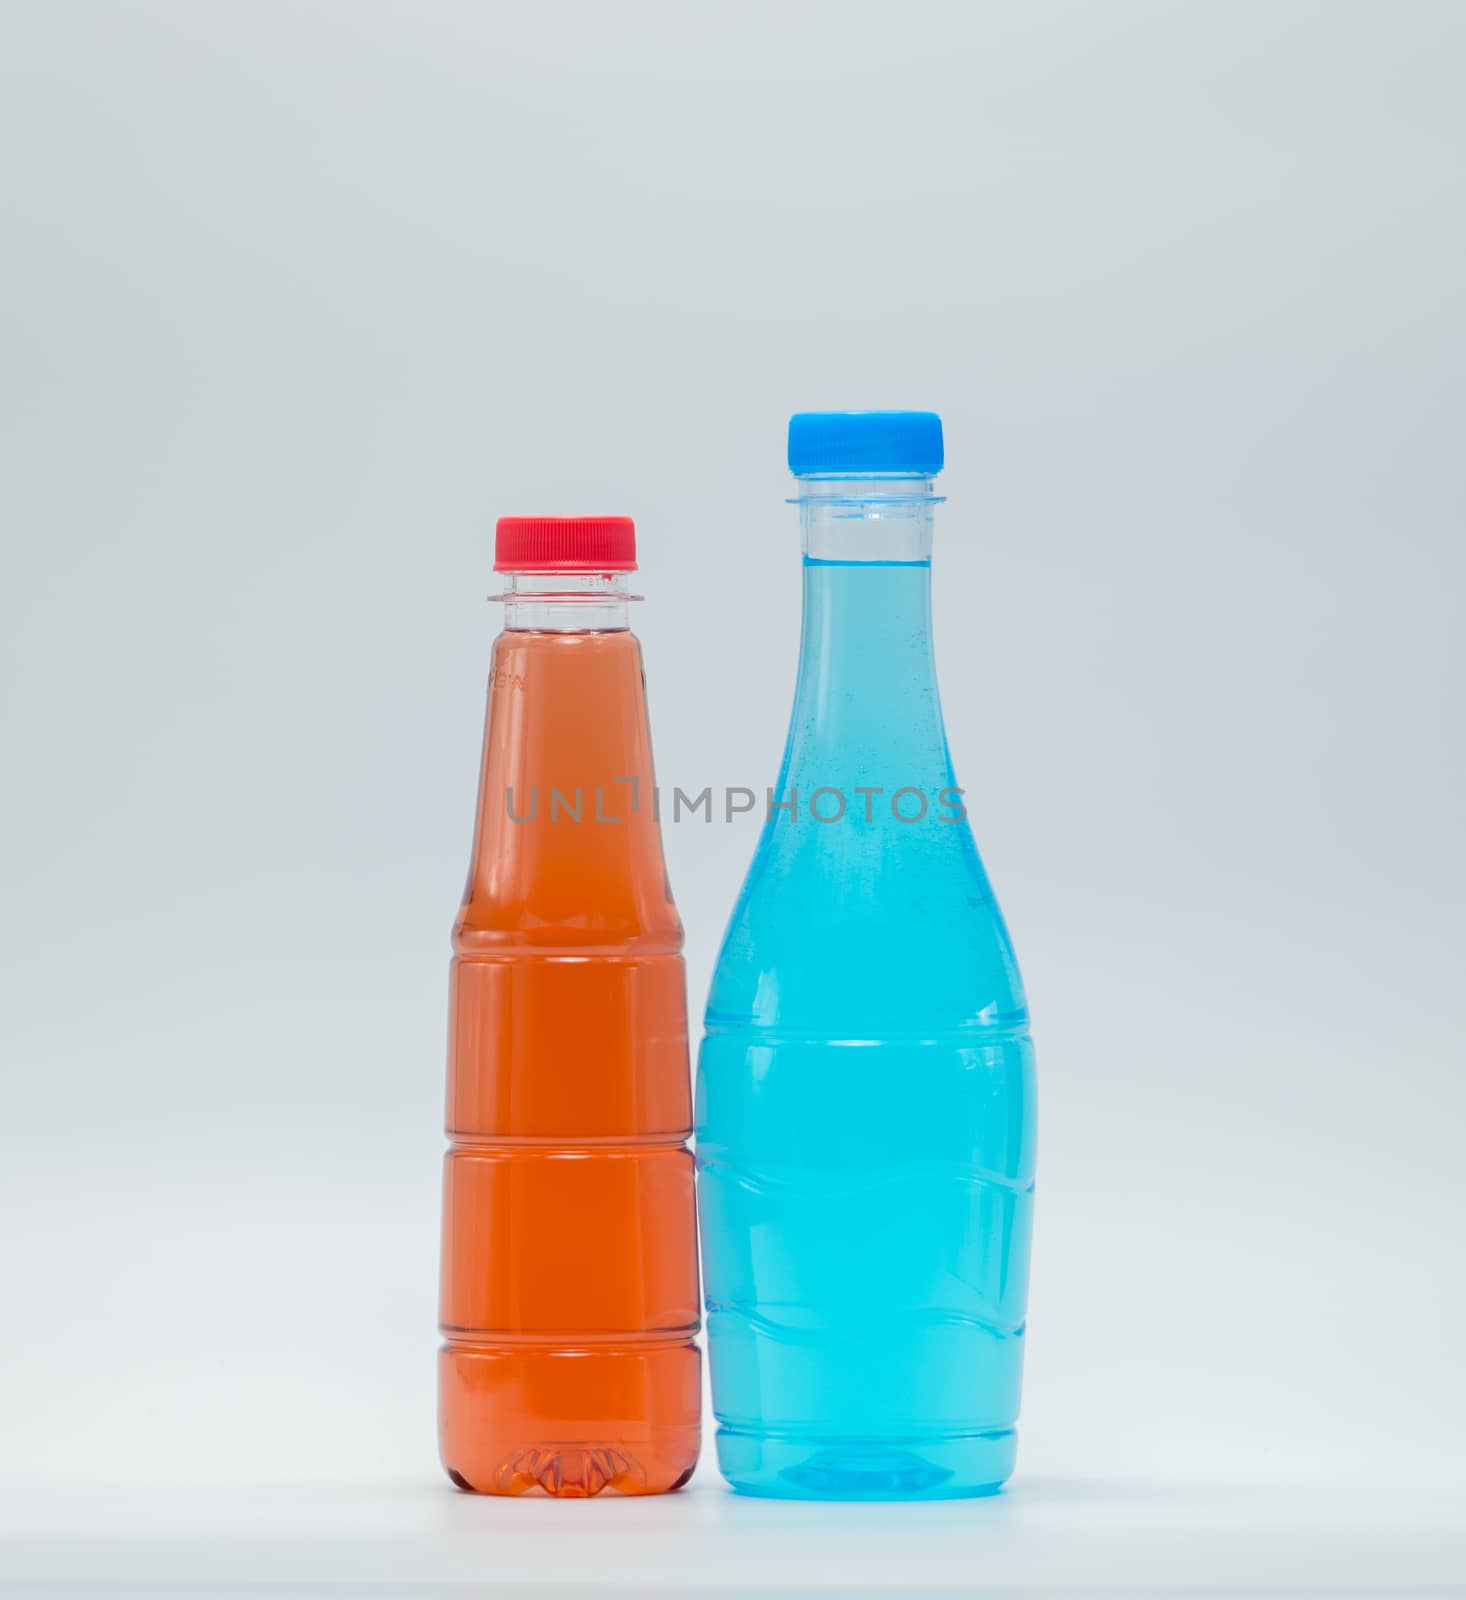 Two modern design bottles of soft drink on white background by Fahroni